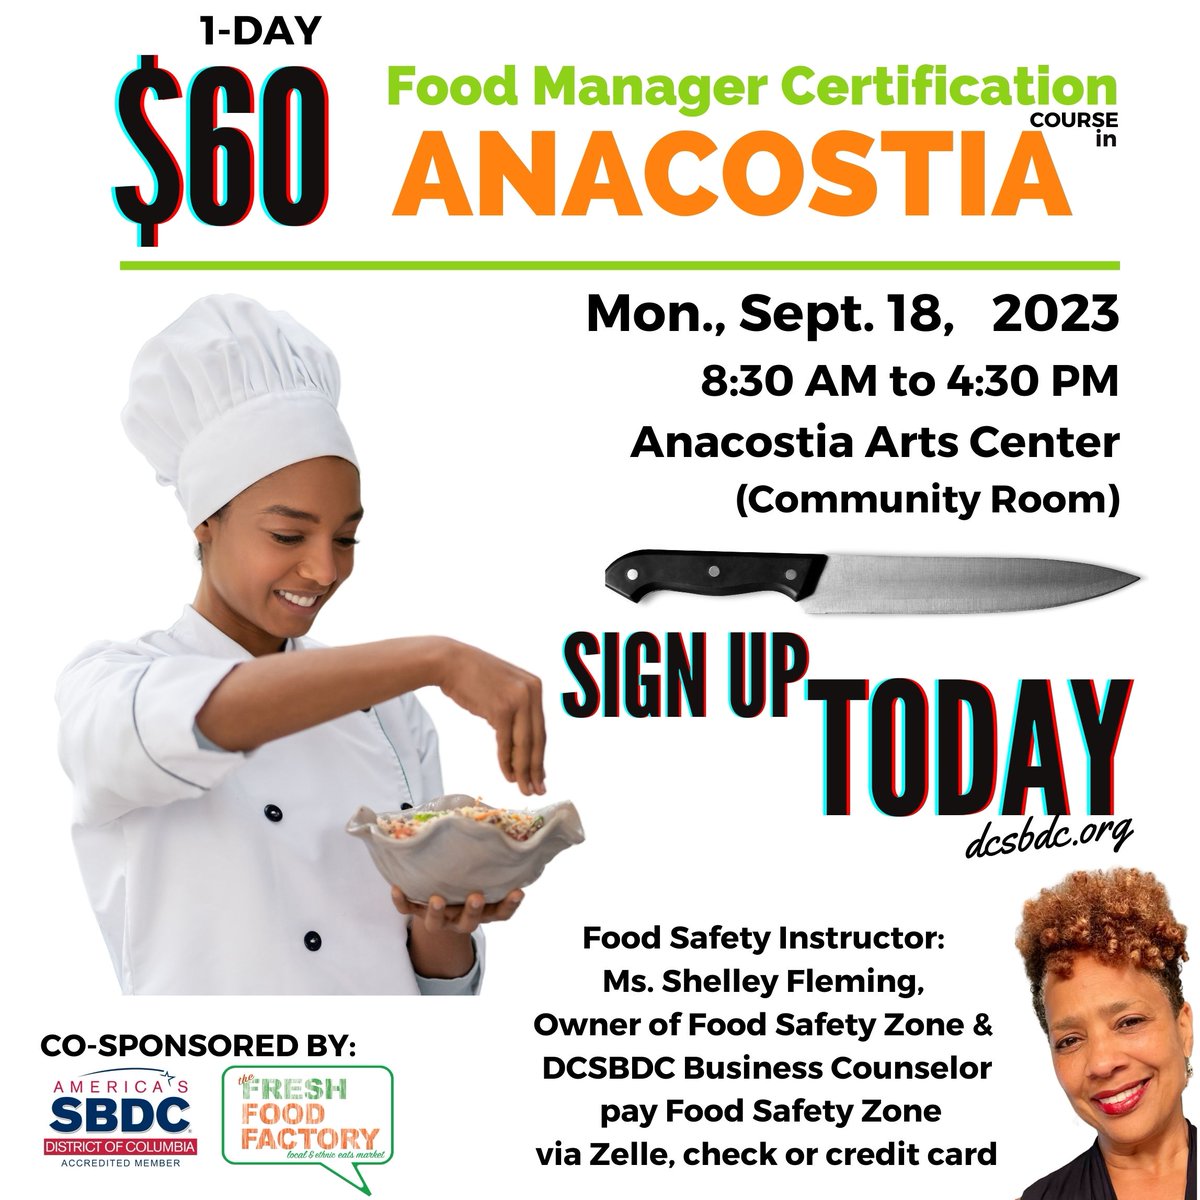 Food Manager Certification Course - September 18th at @AnacostiaArts Center from 8:30am - 4:30pm #DCSBDC #FreshFoodFactory Register at dcsbdc.org